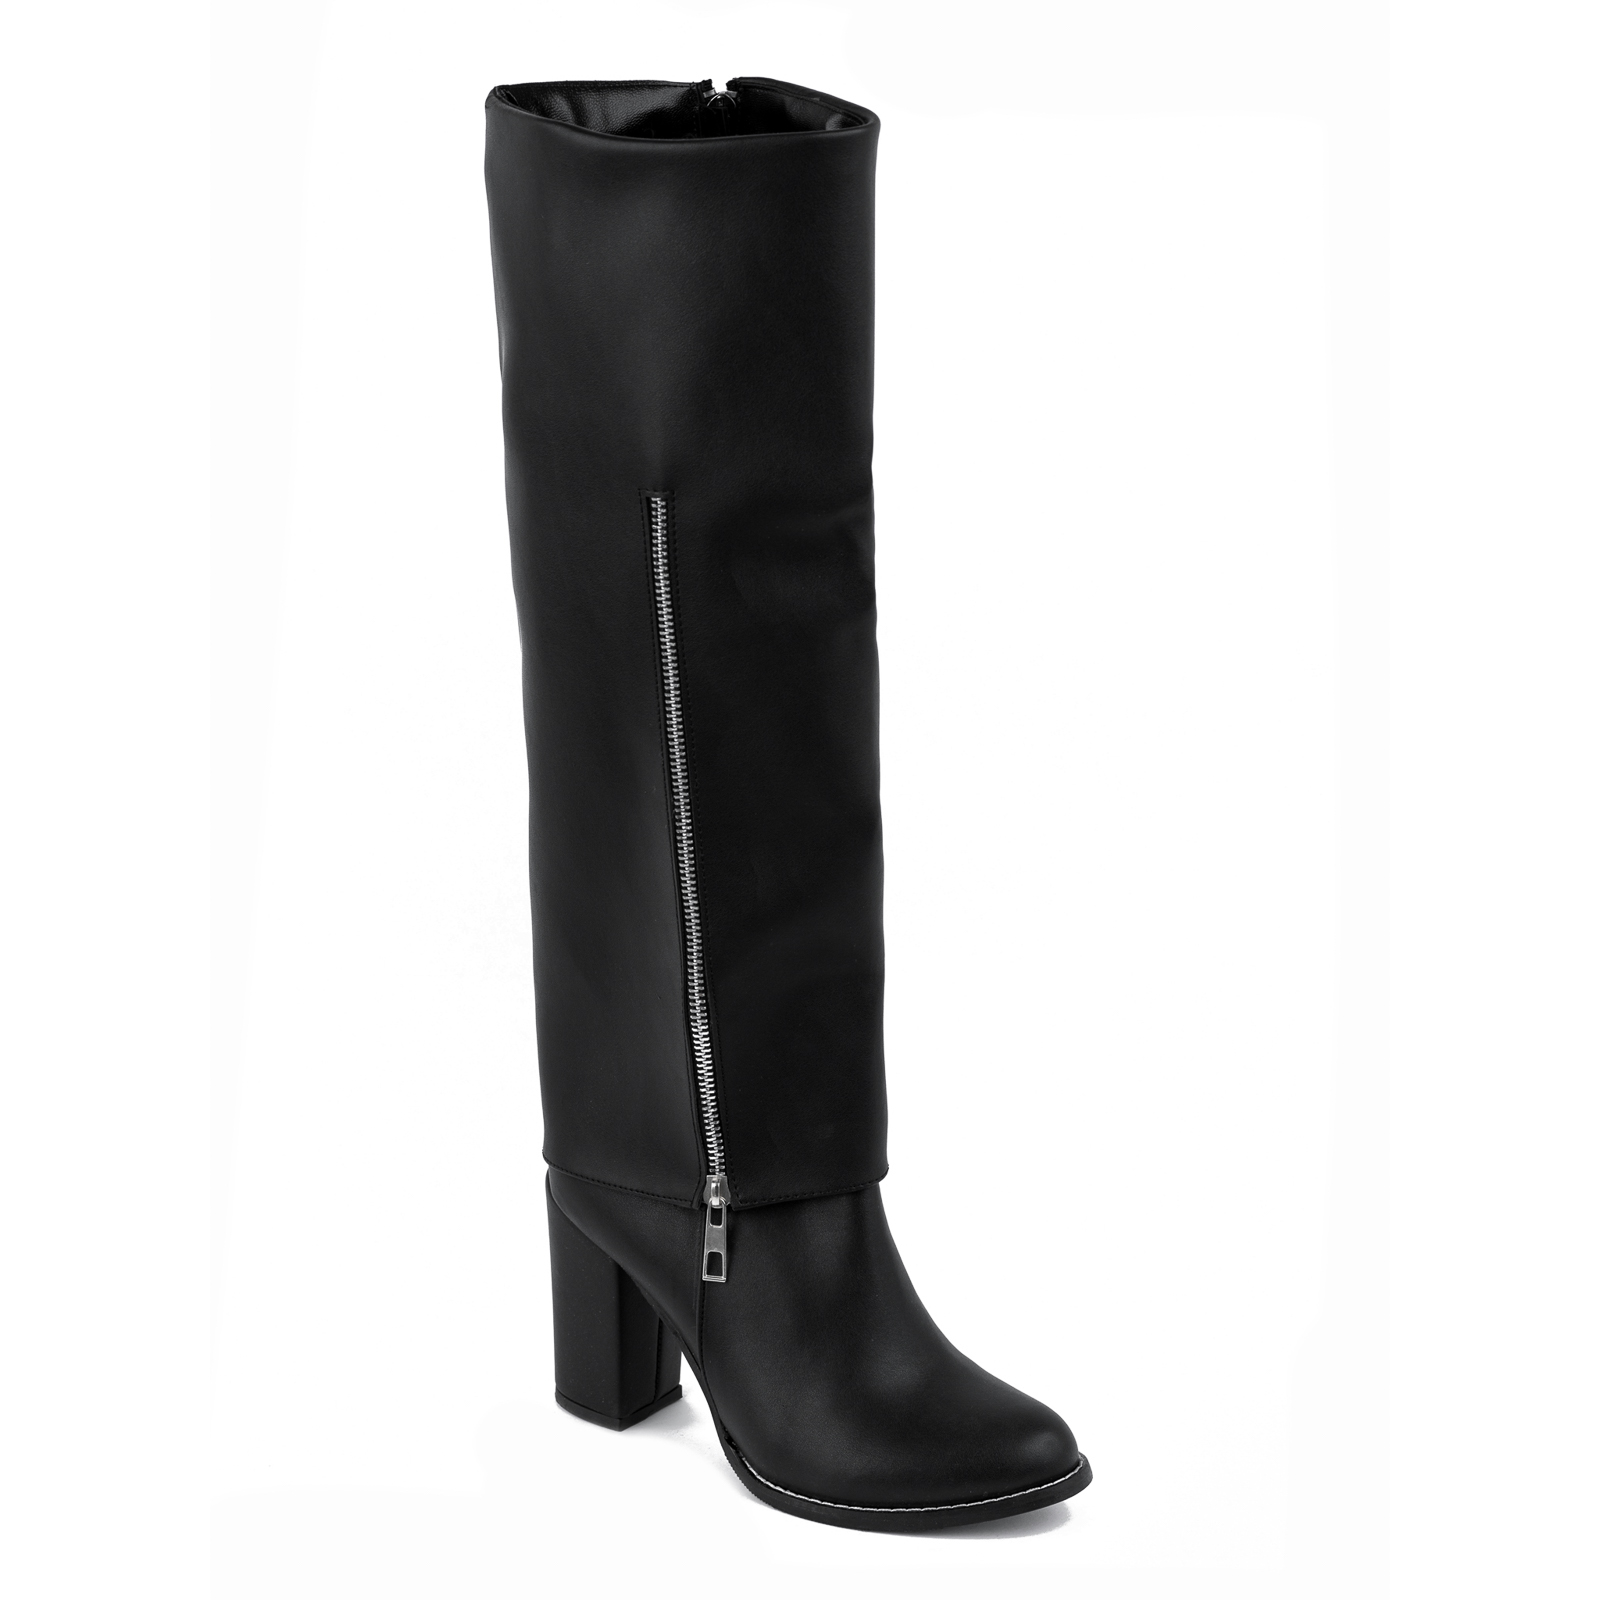 HIGH BOOTS WITH ZIPPER AND BLOCK HEEL - BLACK